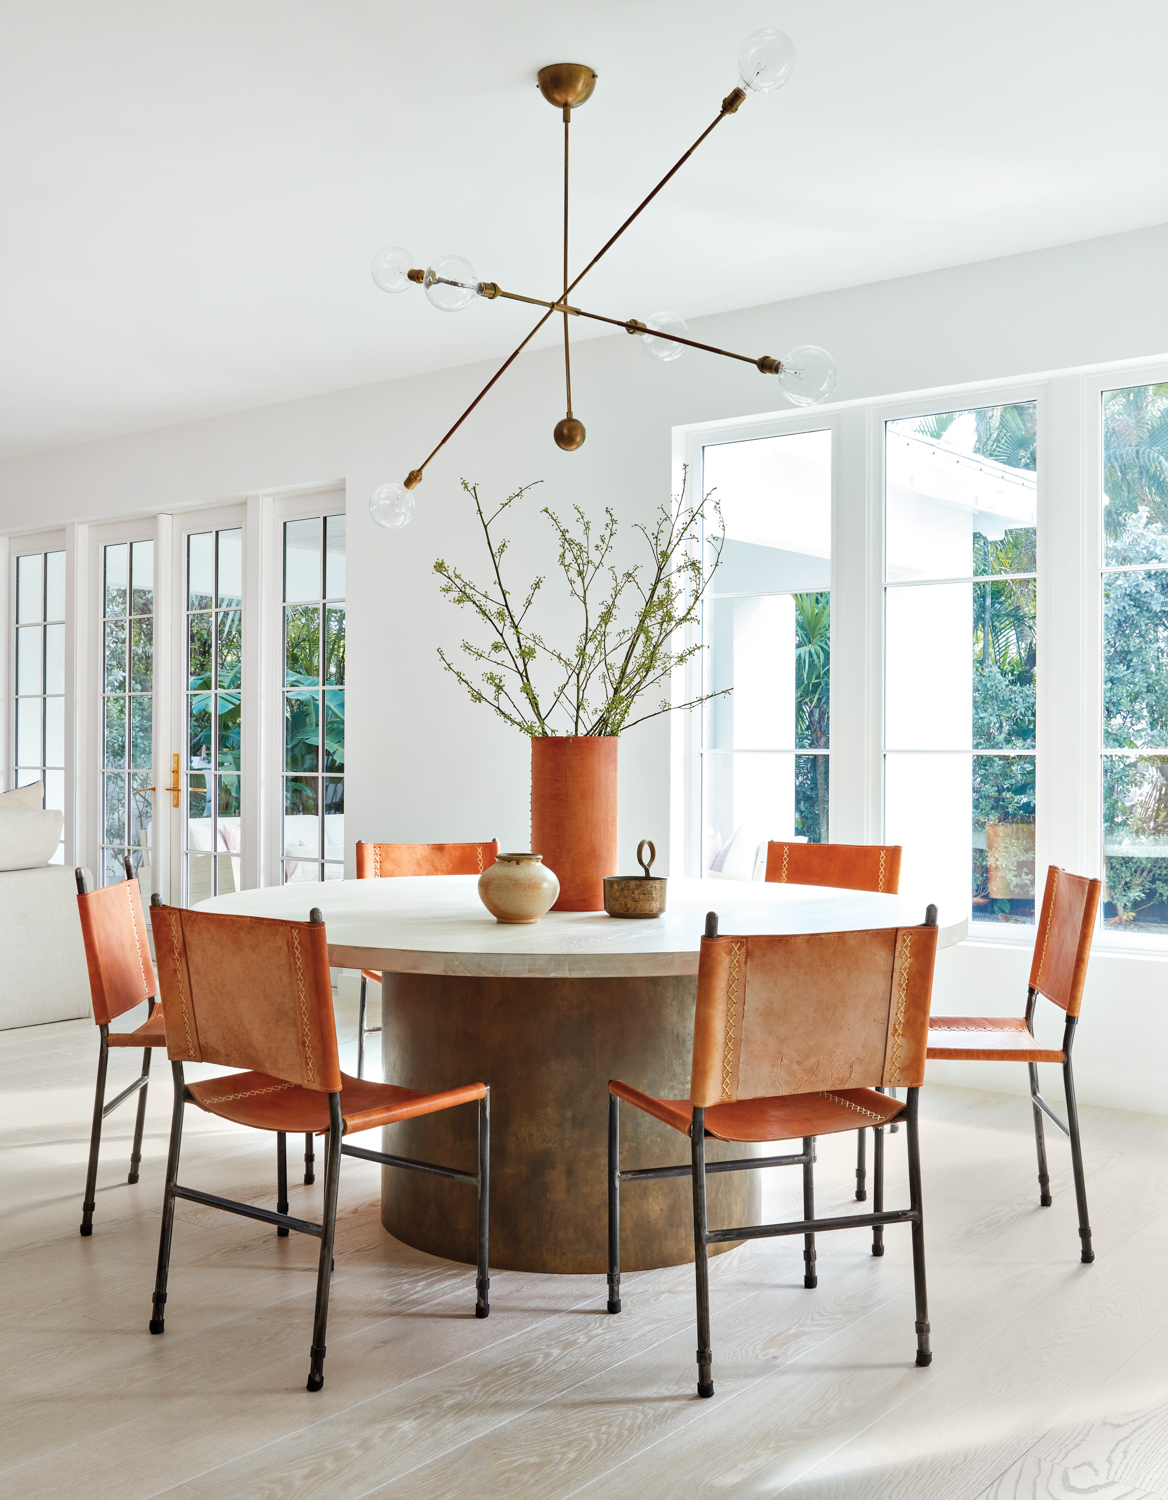 dining area with round table, leather chairs and sculptural chandelier